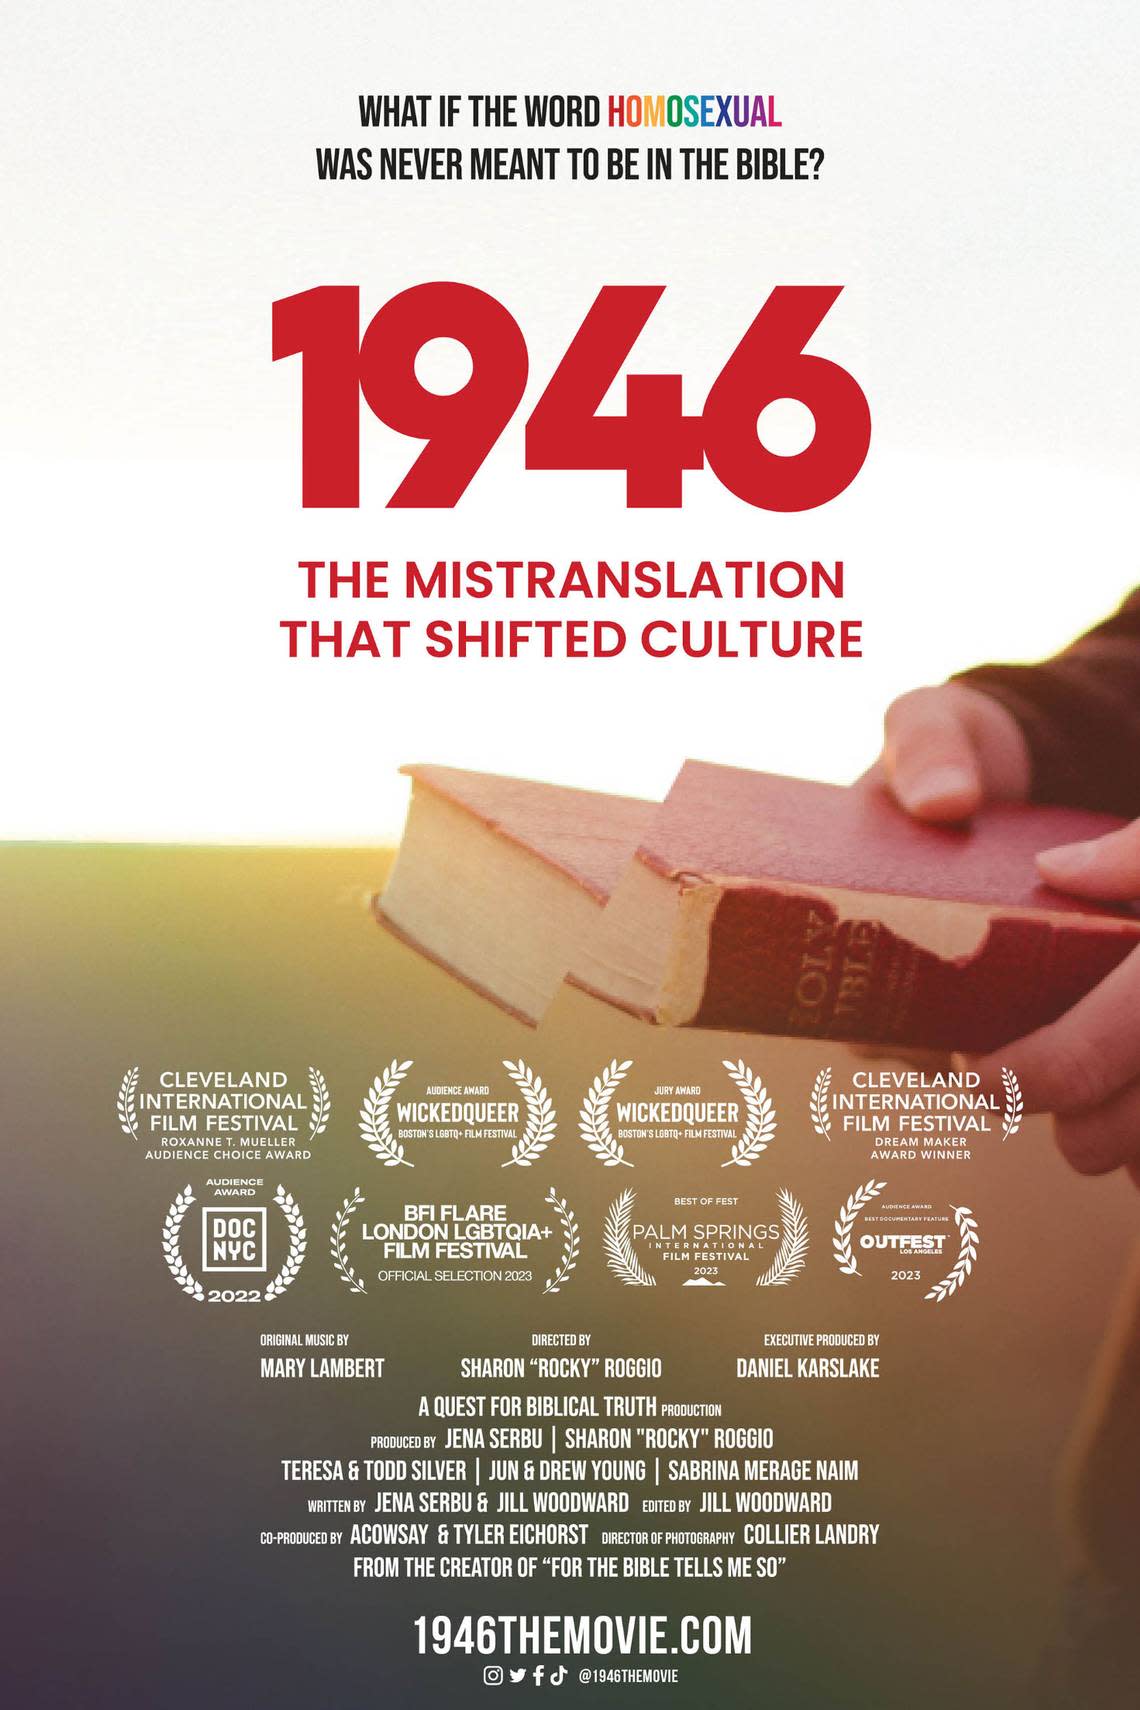 Poster for the movie “1946,” which plays as part of the Religious Film series at Fresno Reel Pride.